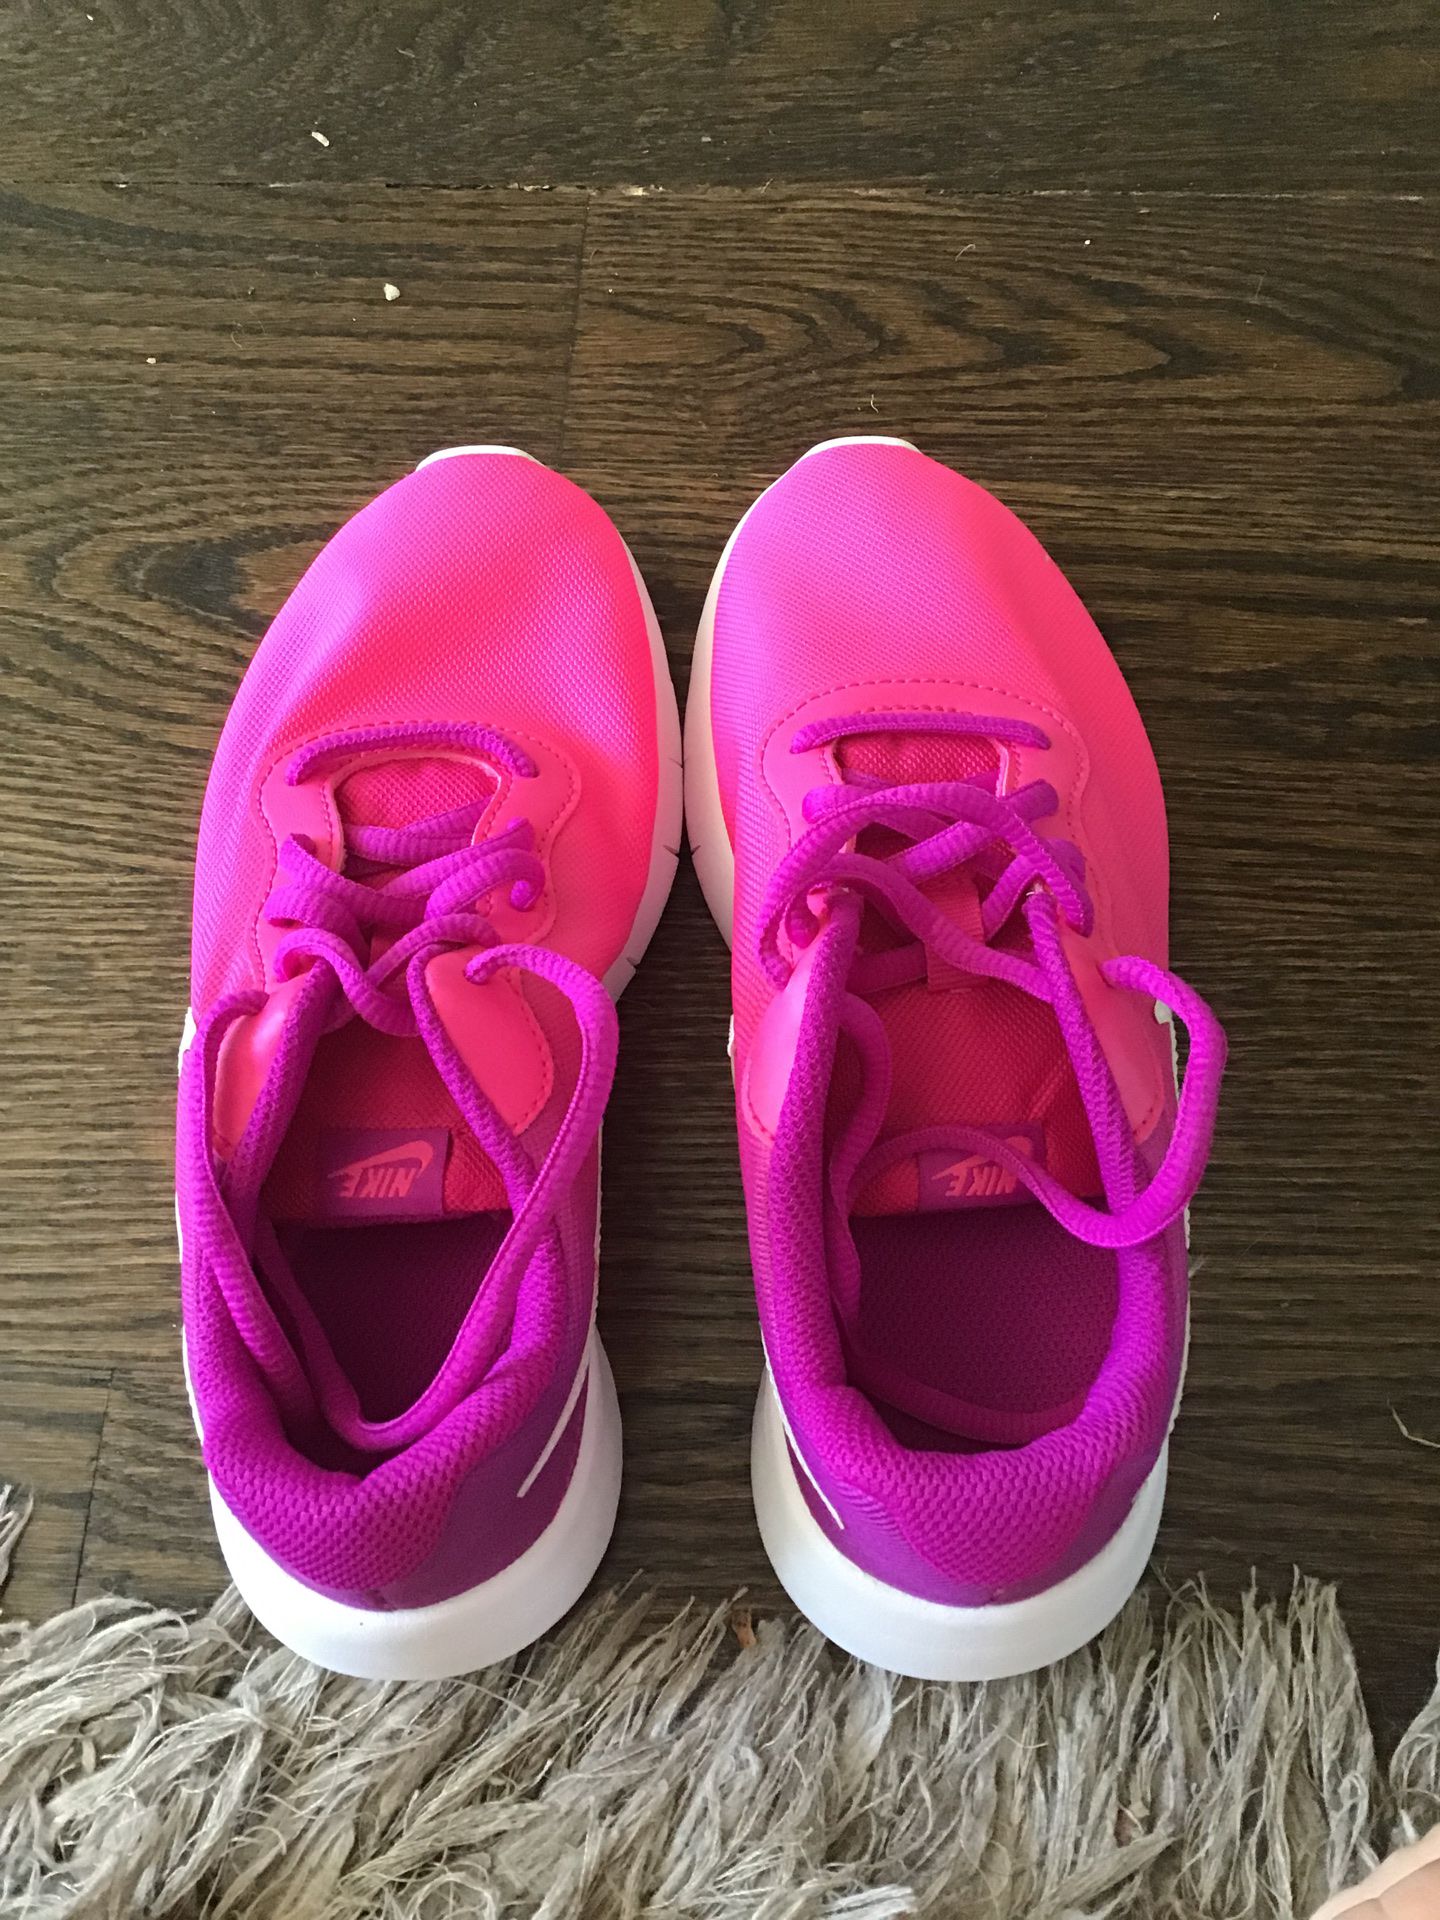 Hot pink that fades to purple Nike shoes sz 2.5y